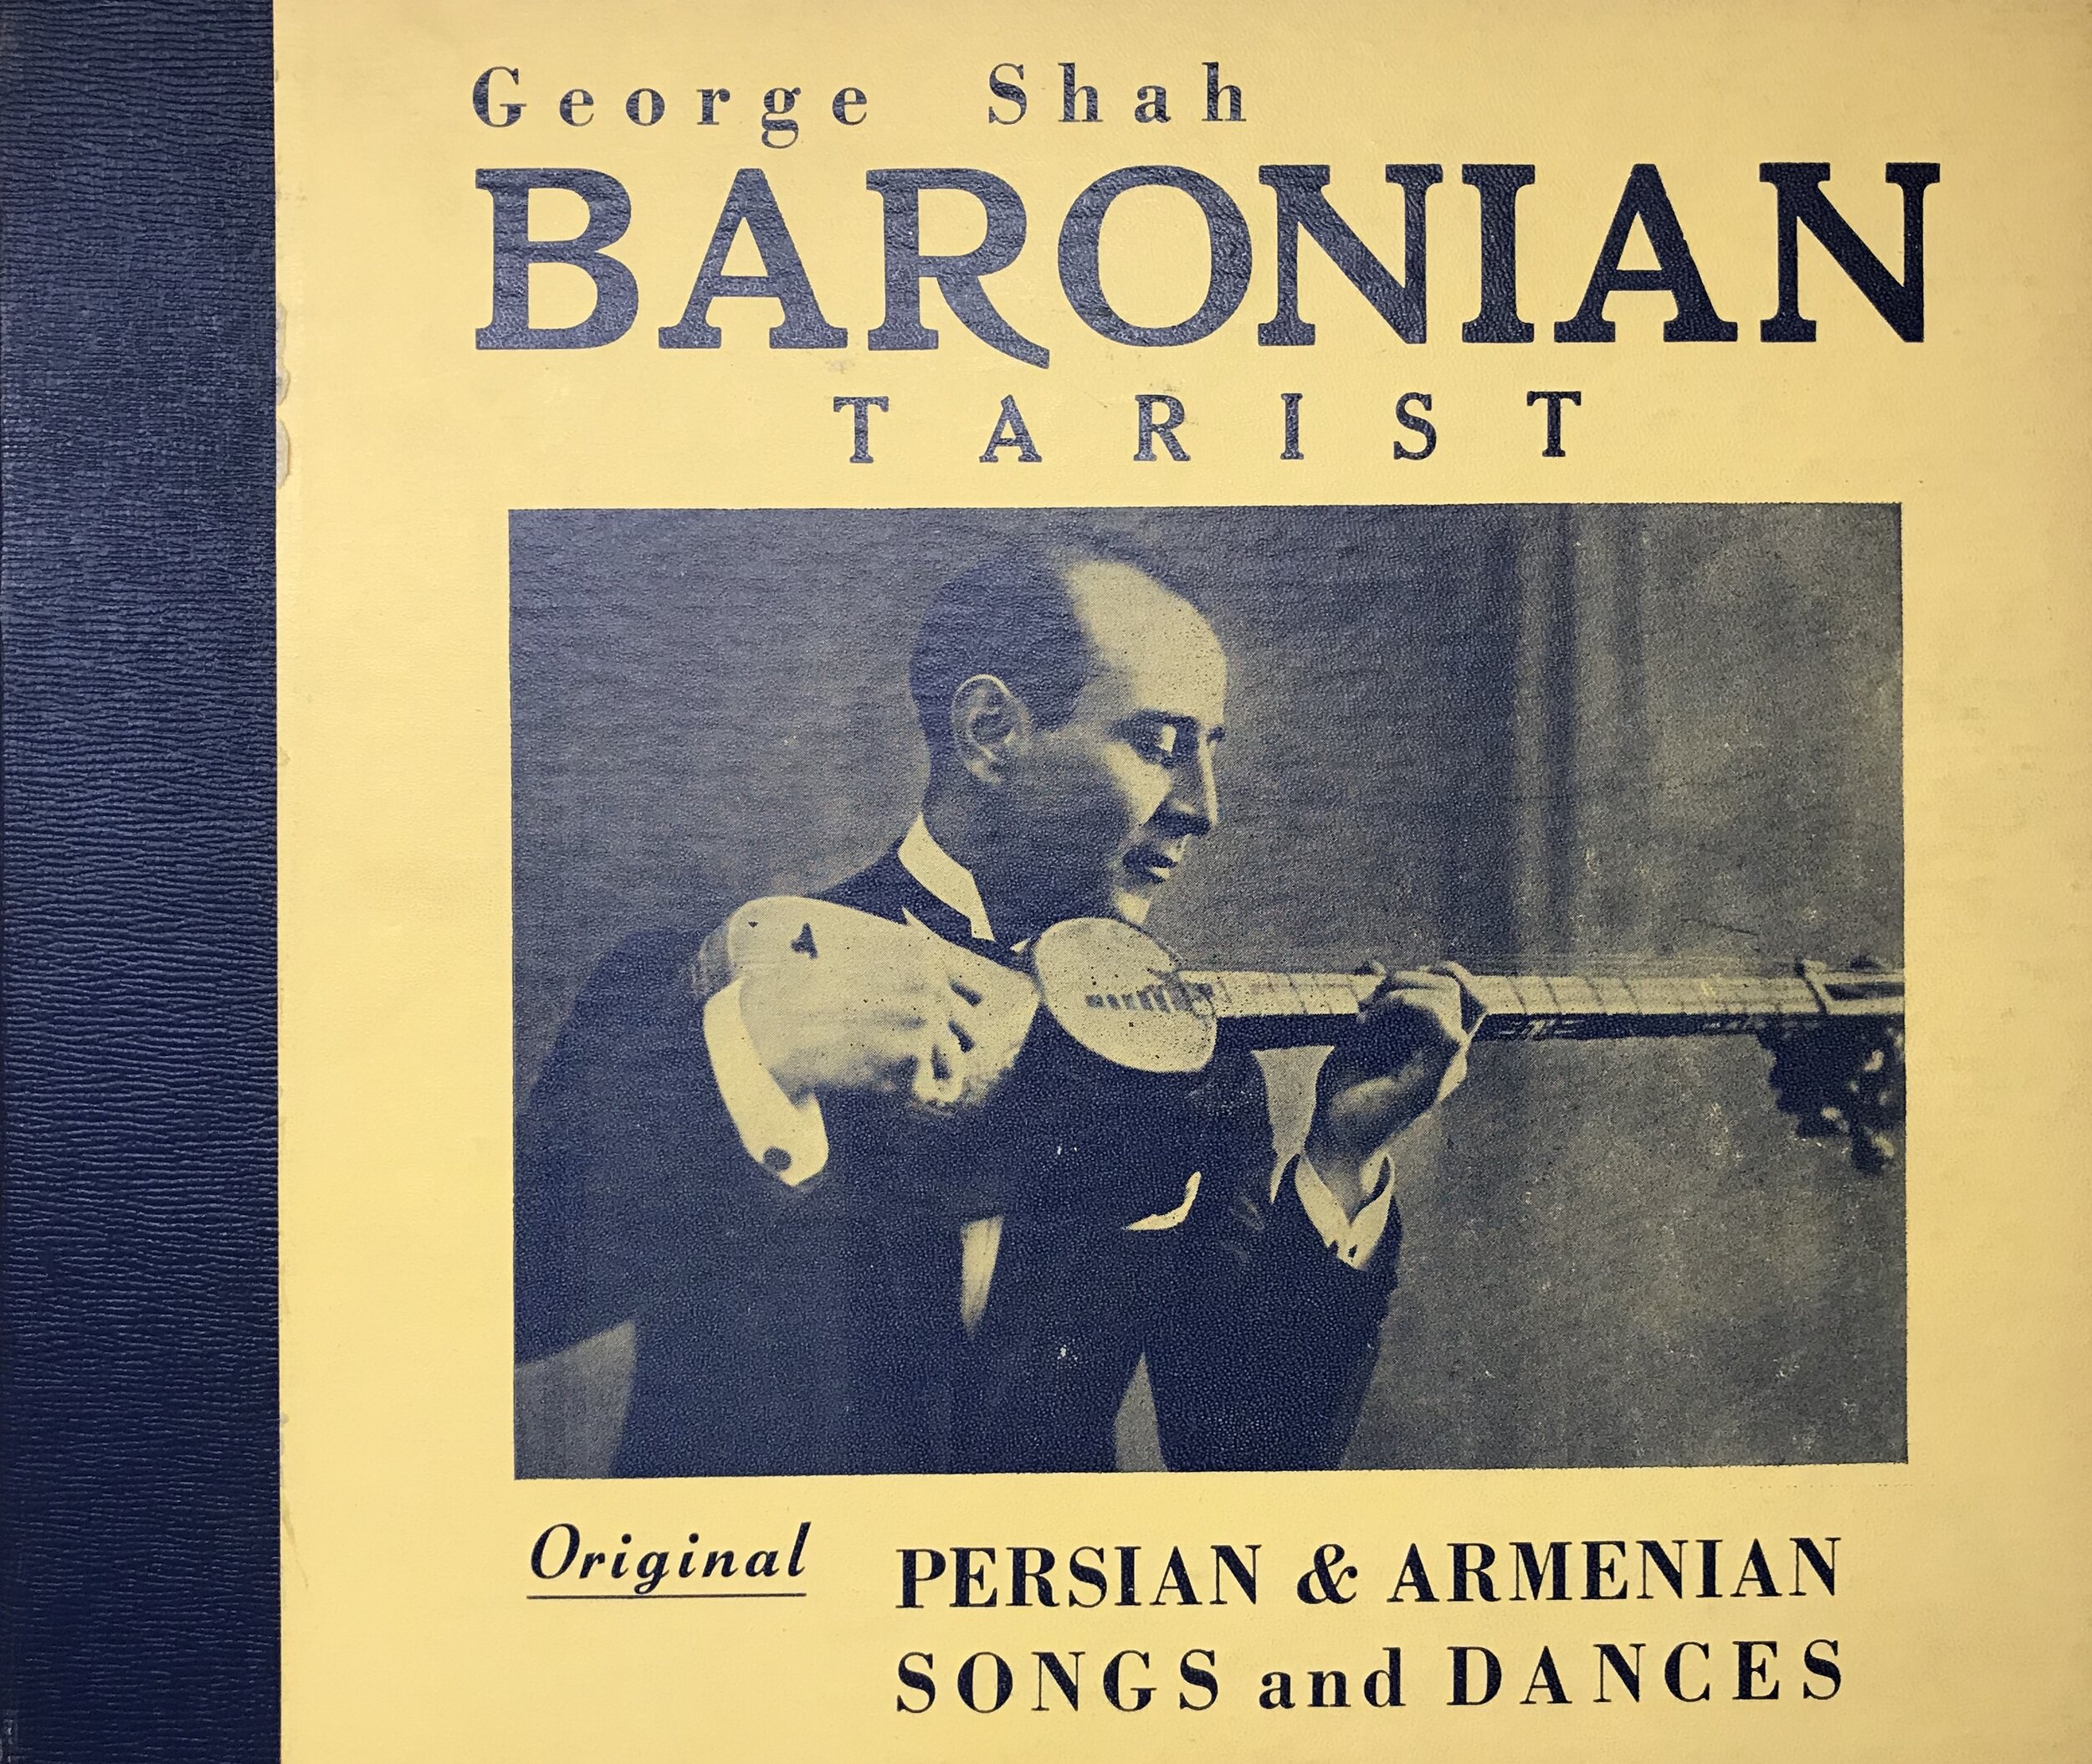  Cover of four disc album set titled "George Shah-Baronian Tarist" self produced by Shah-Baronian. (Scan: Armenian Museum) 